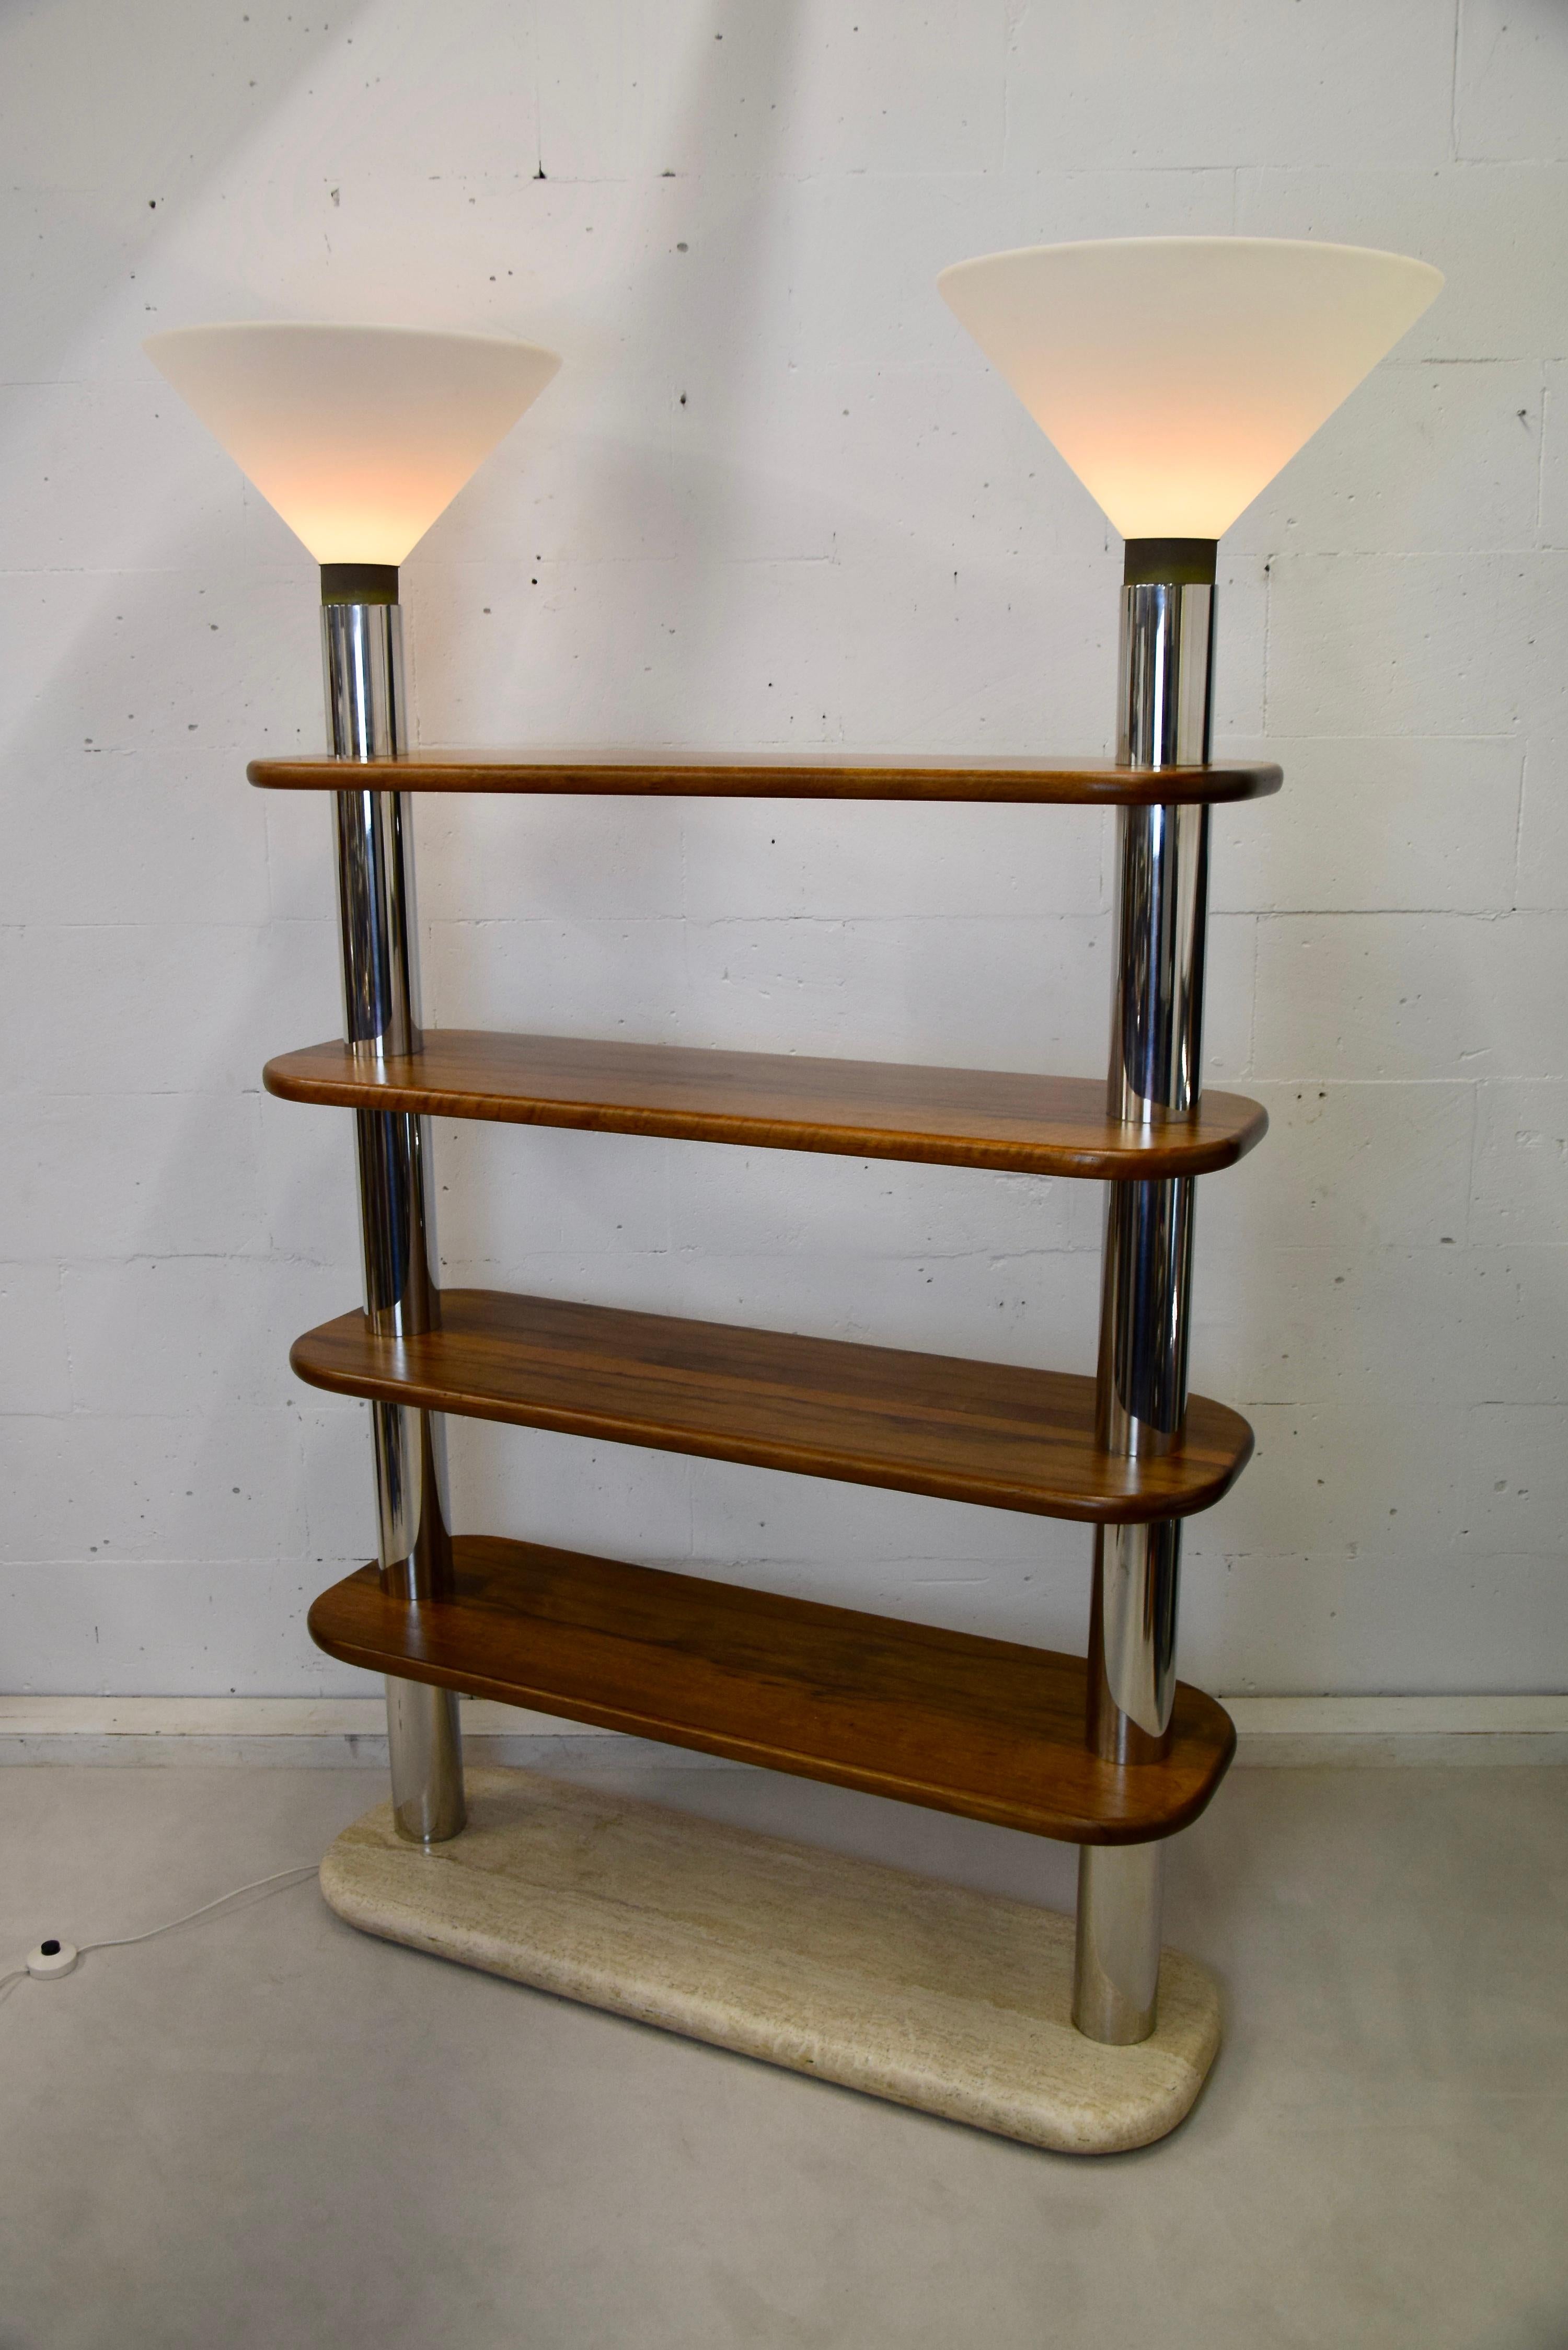 Late 20th Century Italian Post Modern Travertine, Wood and Polished Stainless Steel Bookcase For Sale